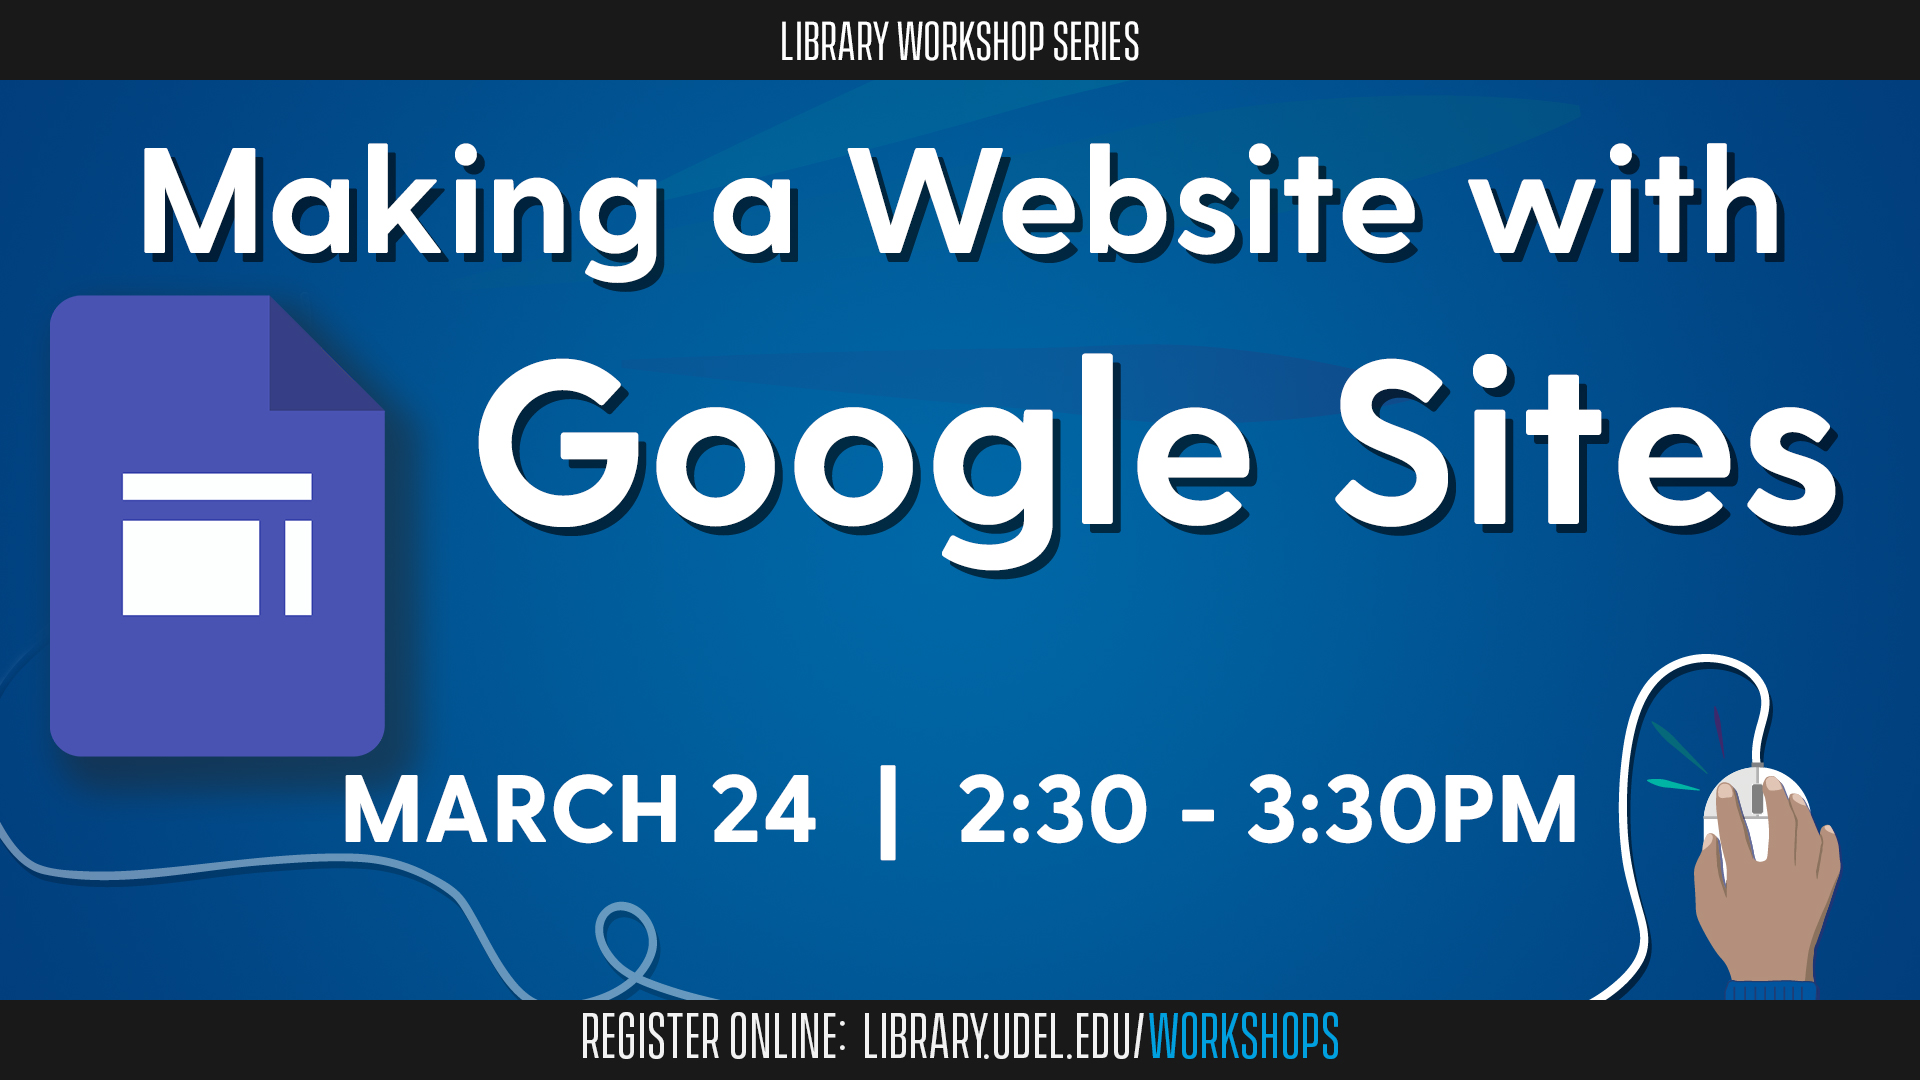 Making a Website with Google Sites